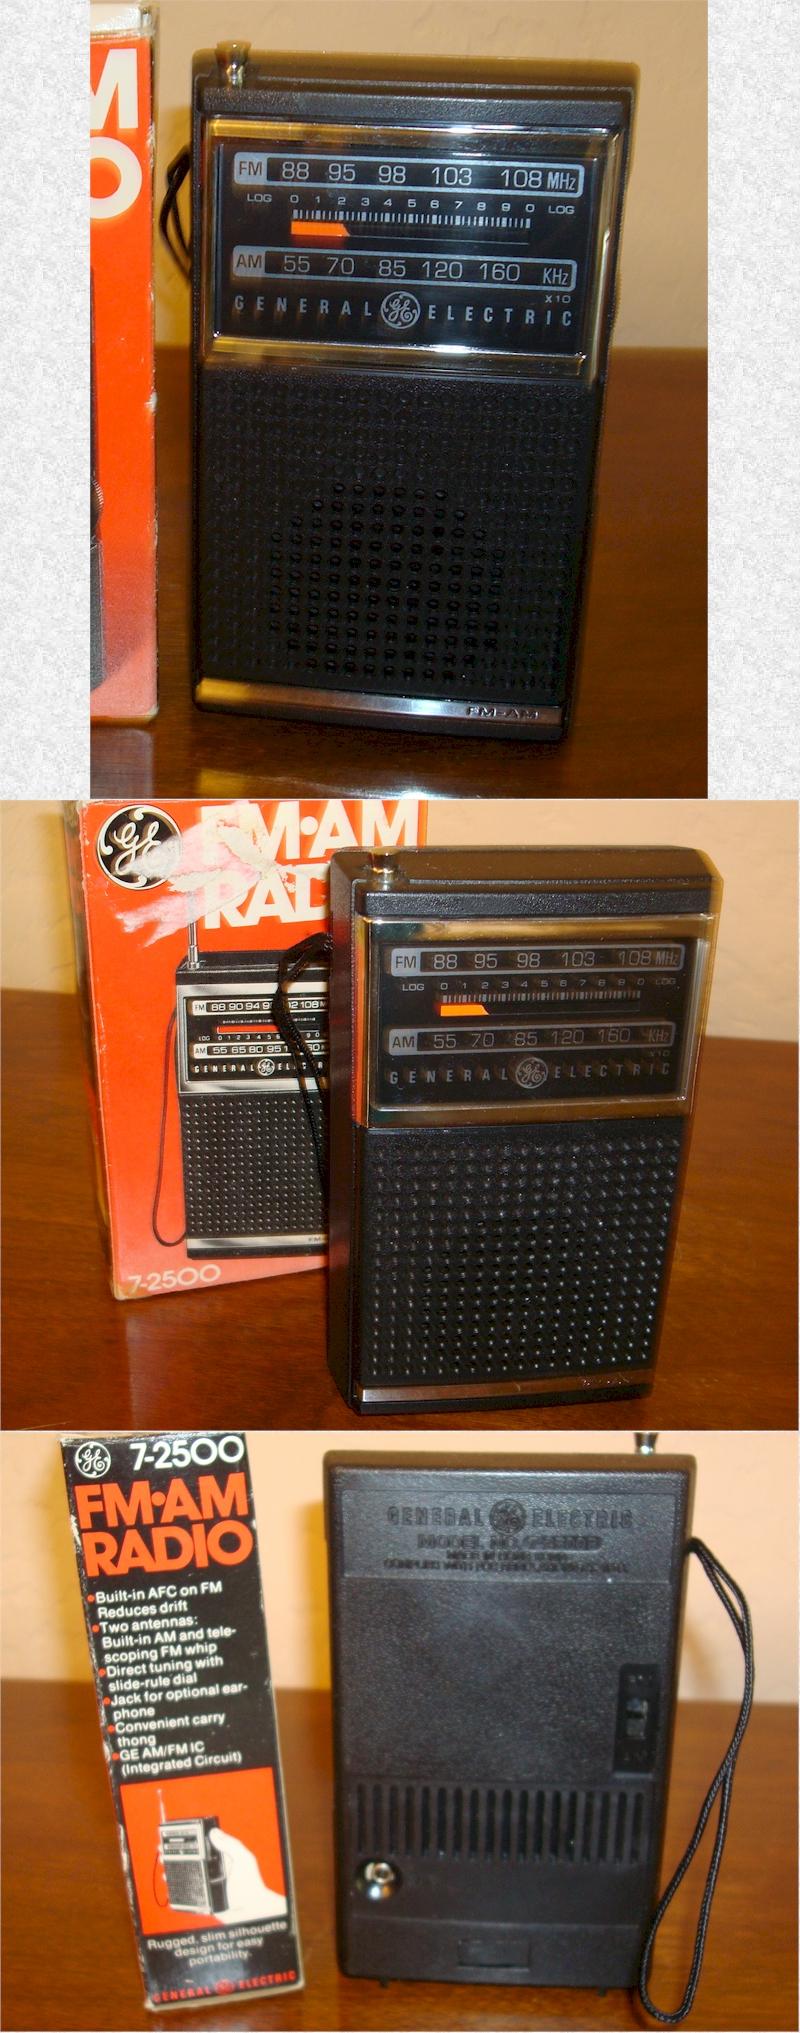 General Electric 7-2500 AM/FM with Box